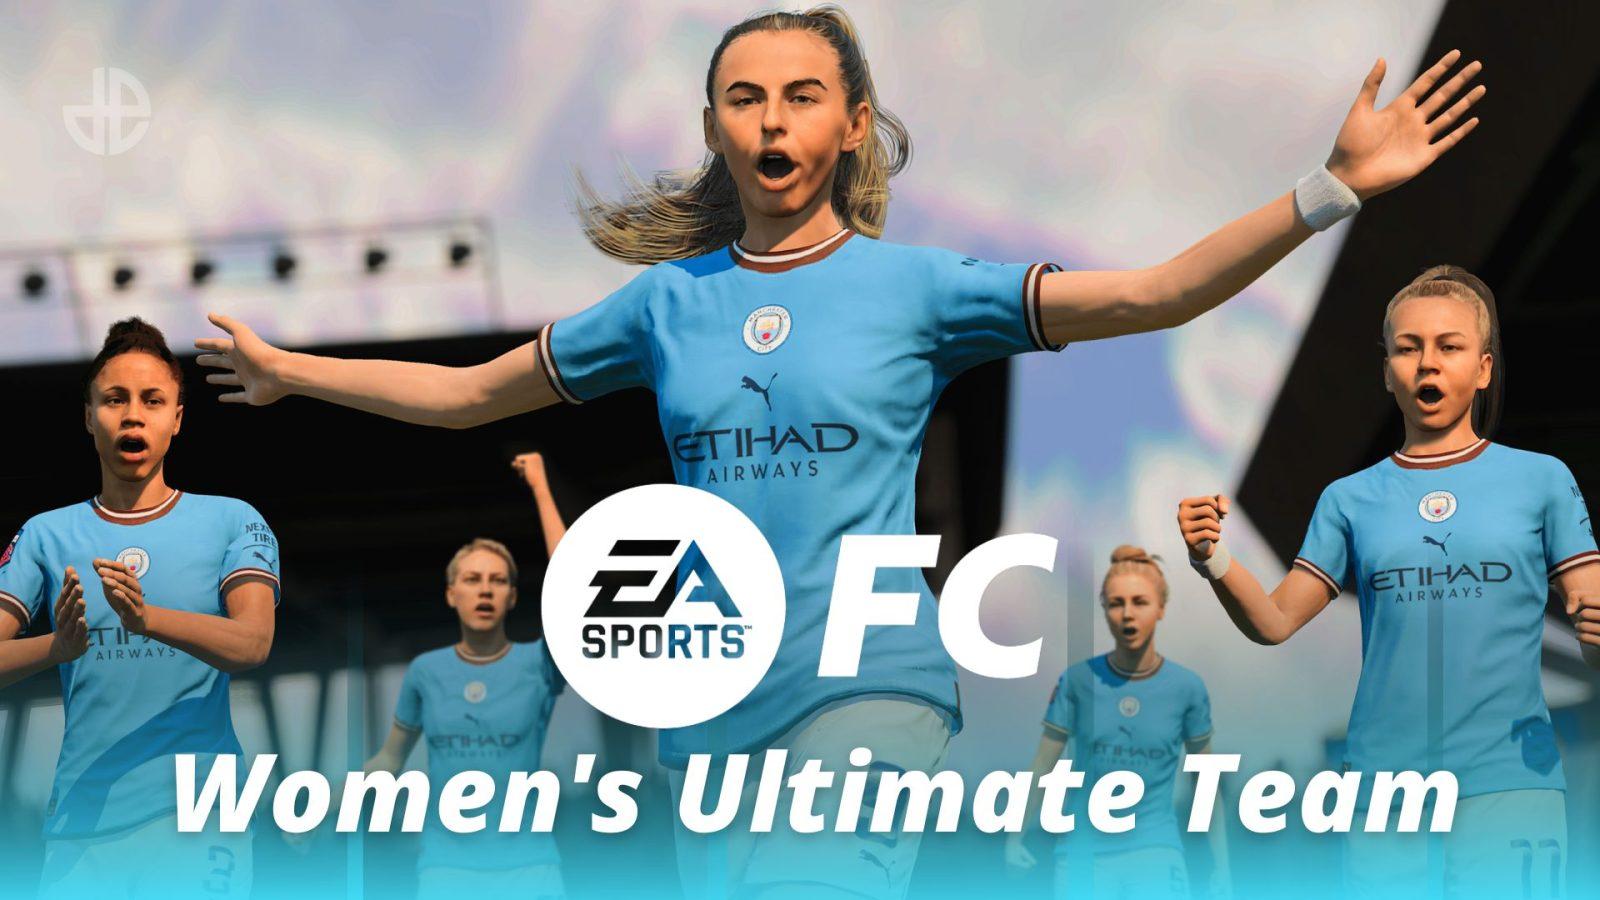 The Ultimate Guide to EA Sports FC